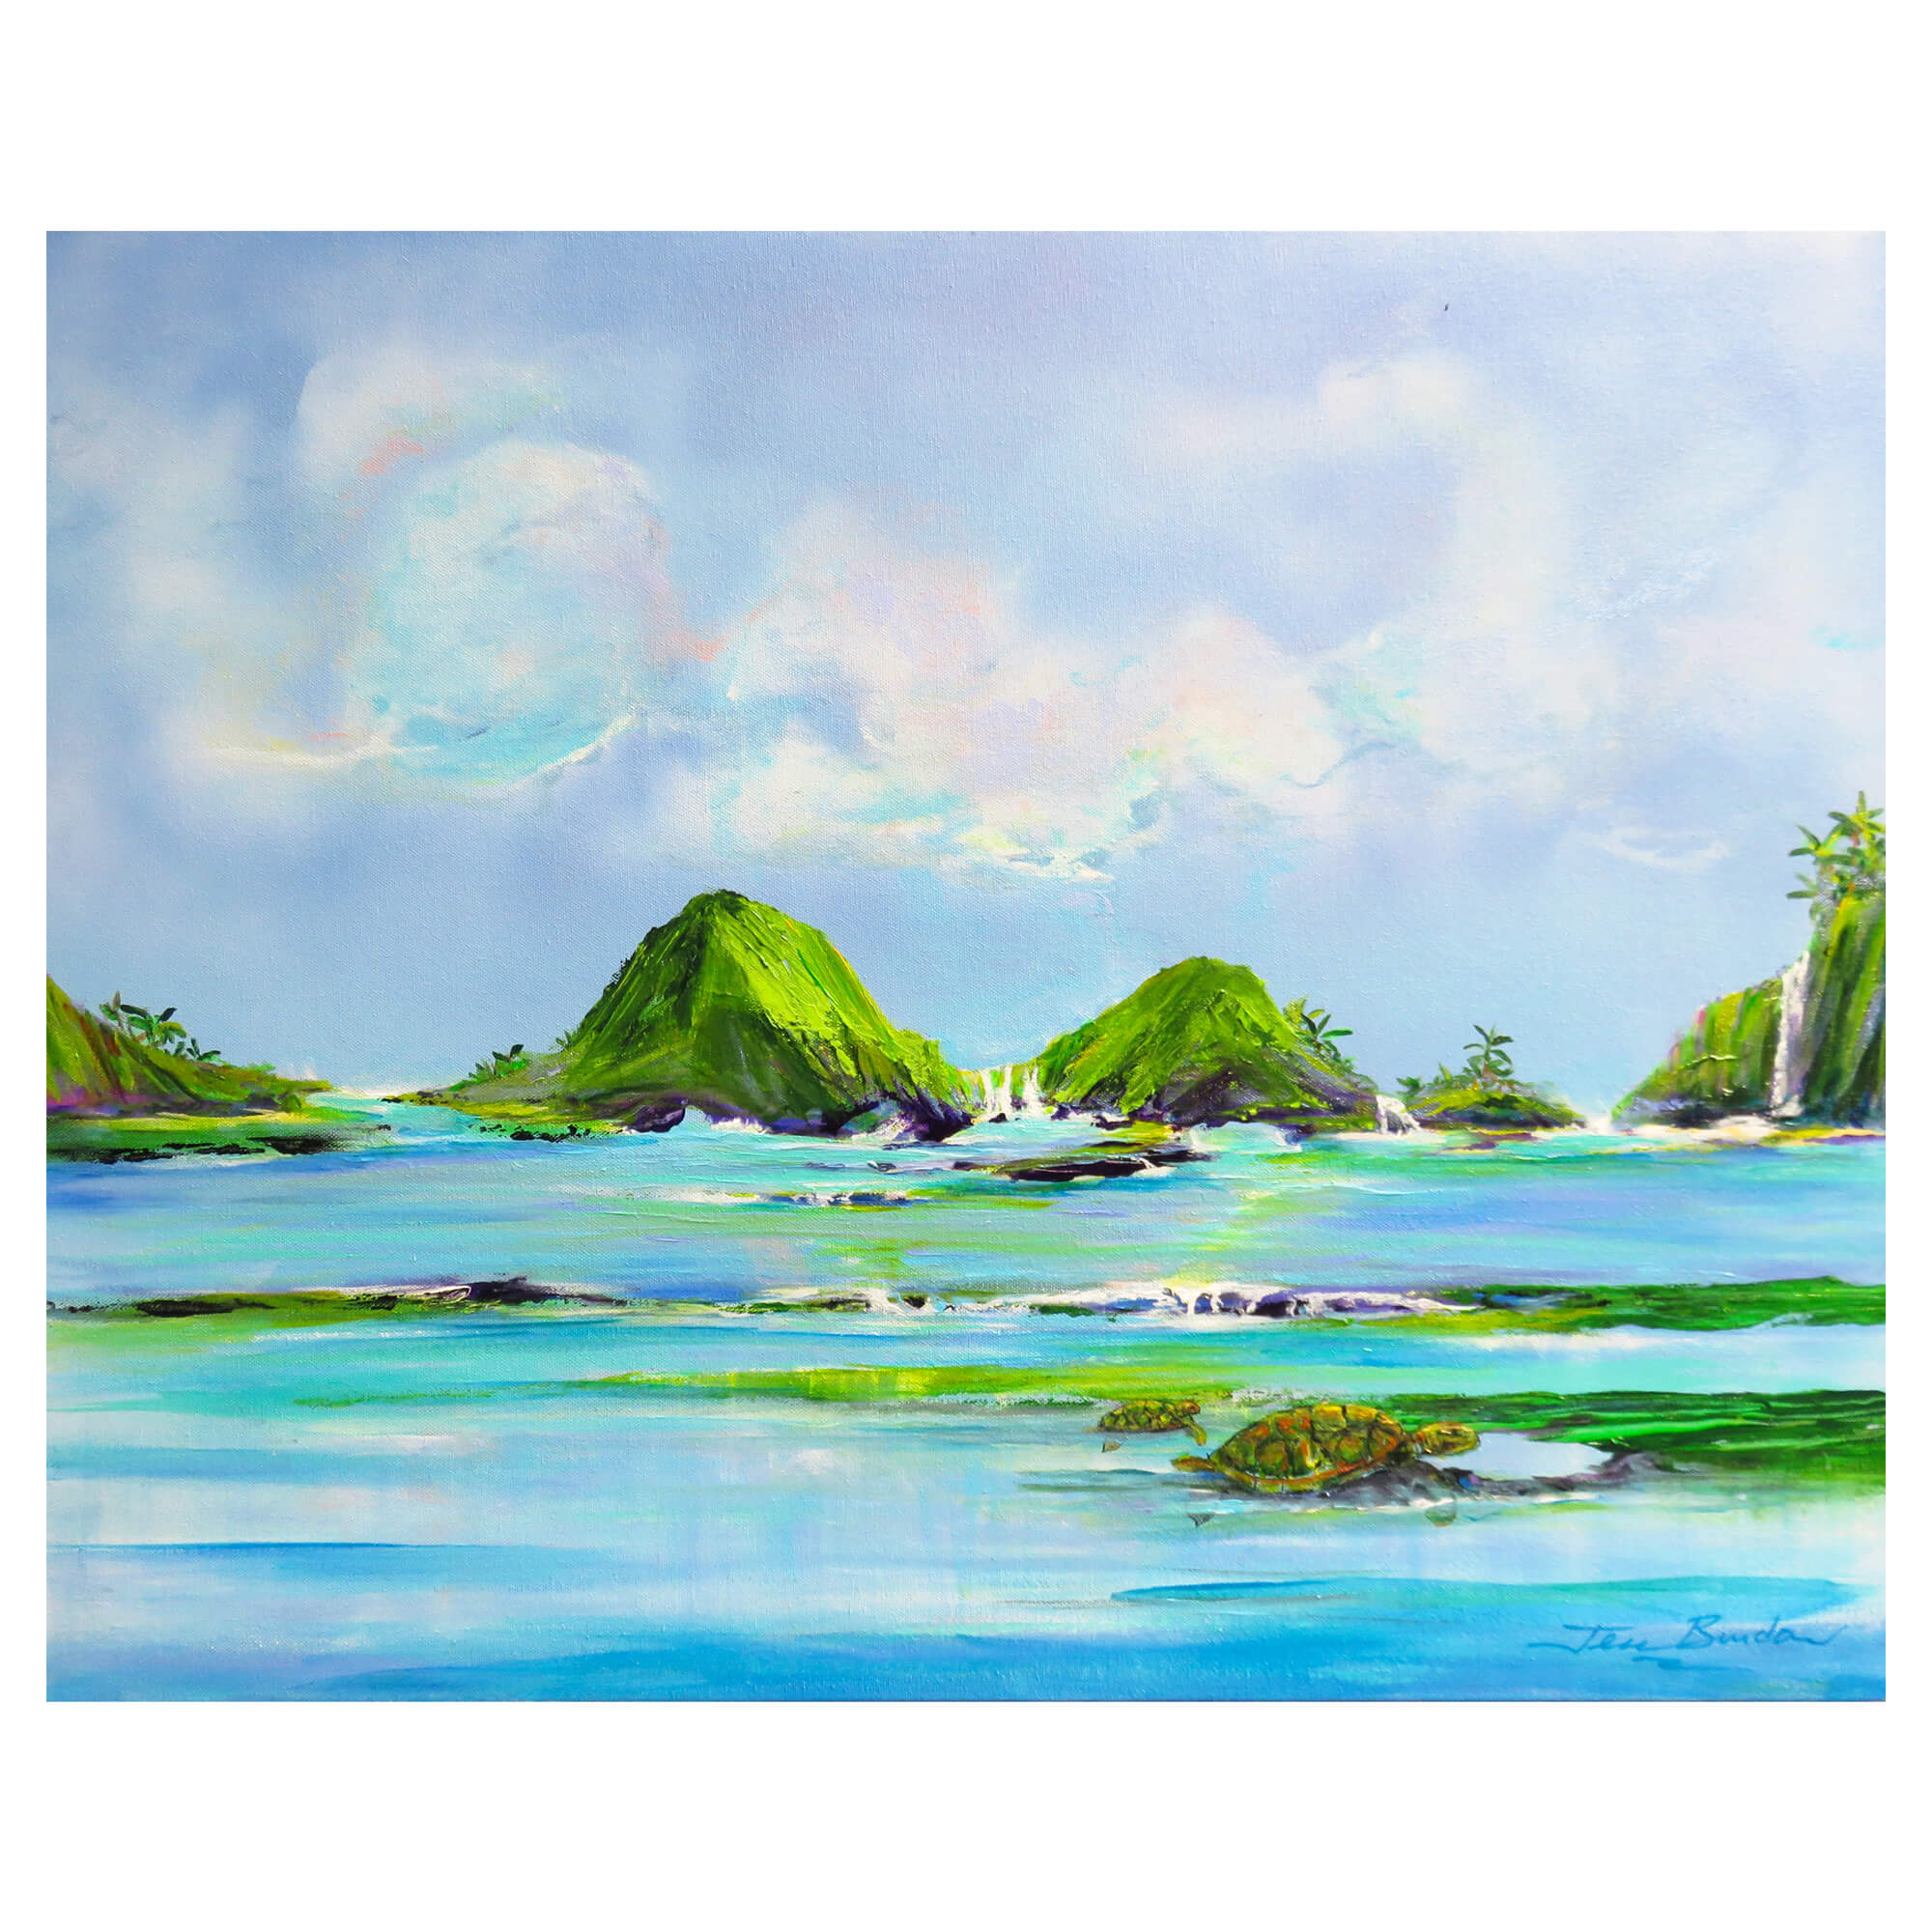 A seascape surrounded by mountains and flowing water by Hawaii artist Jess Burda